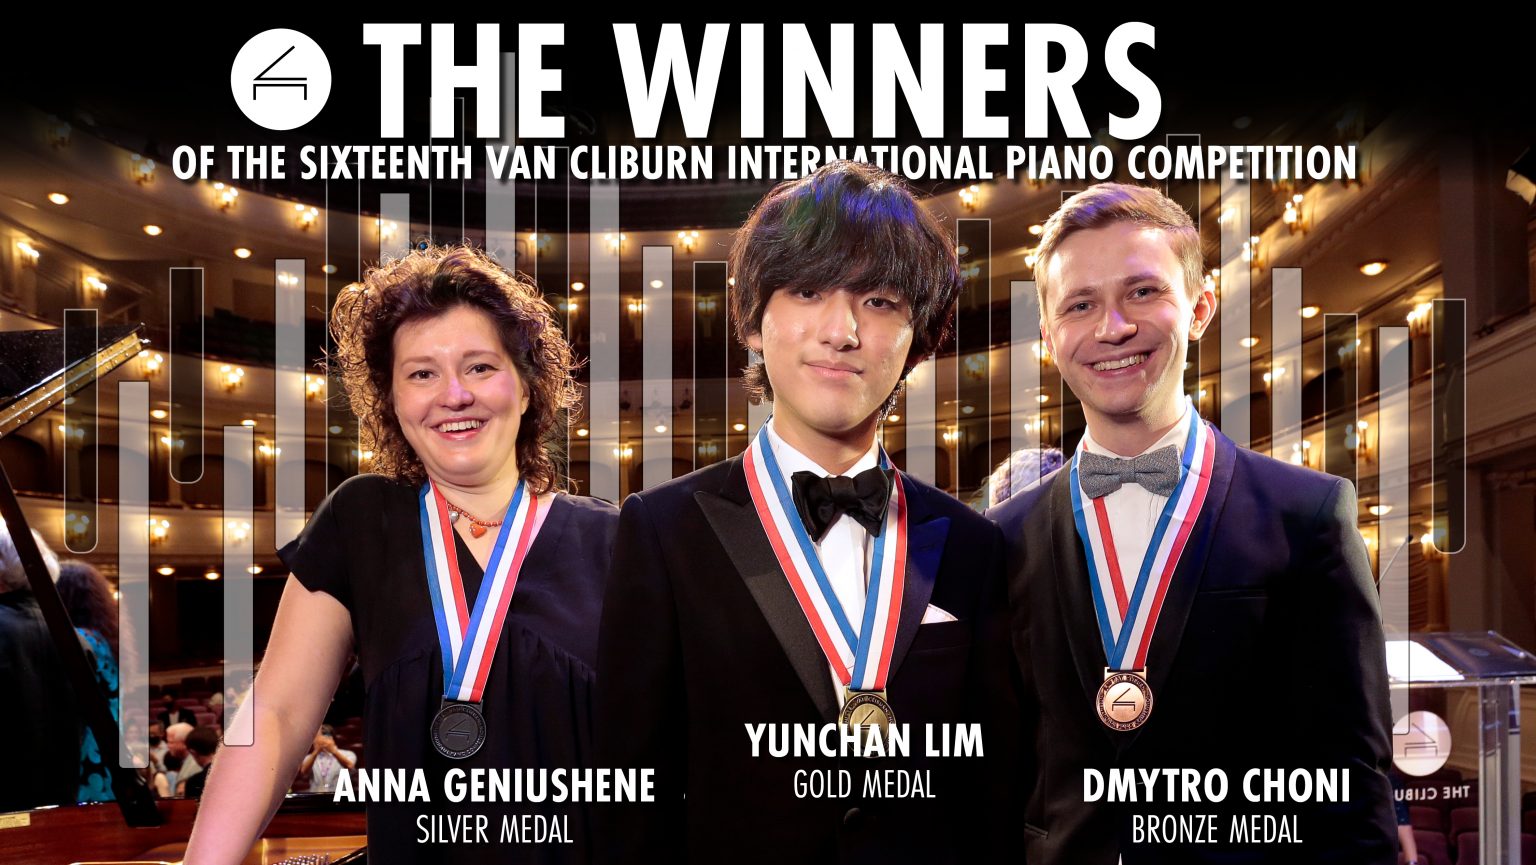 The Cliburn International Piano Competition